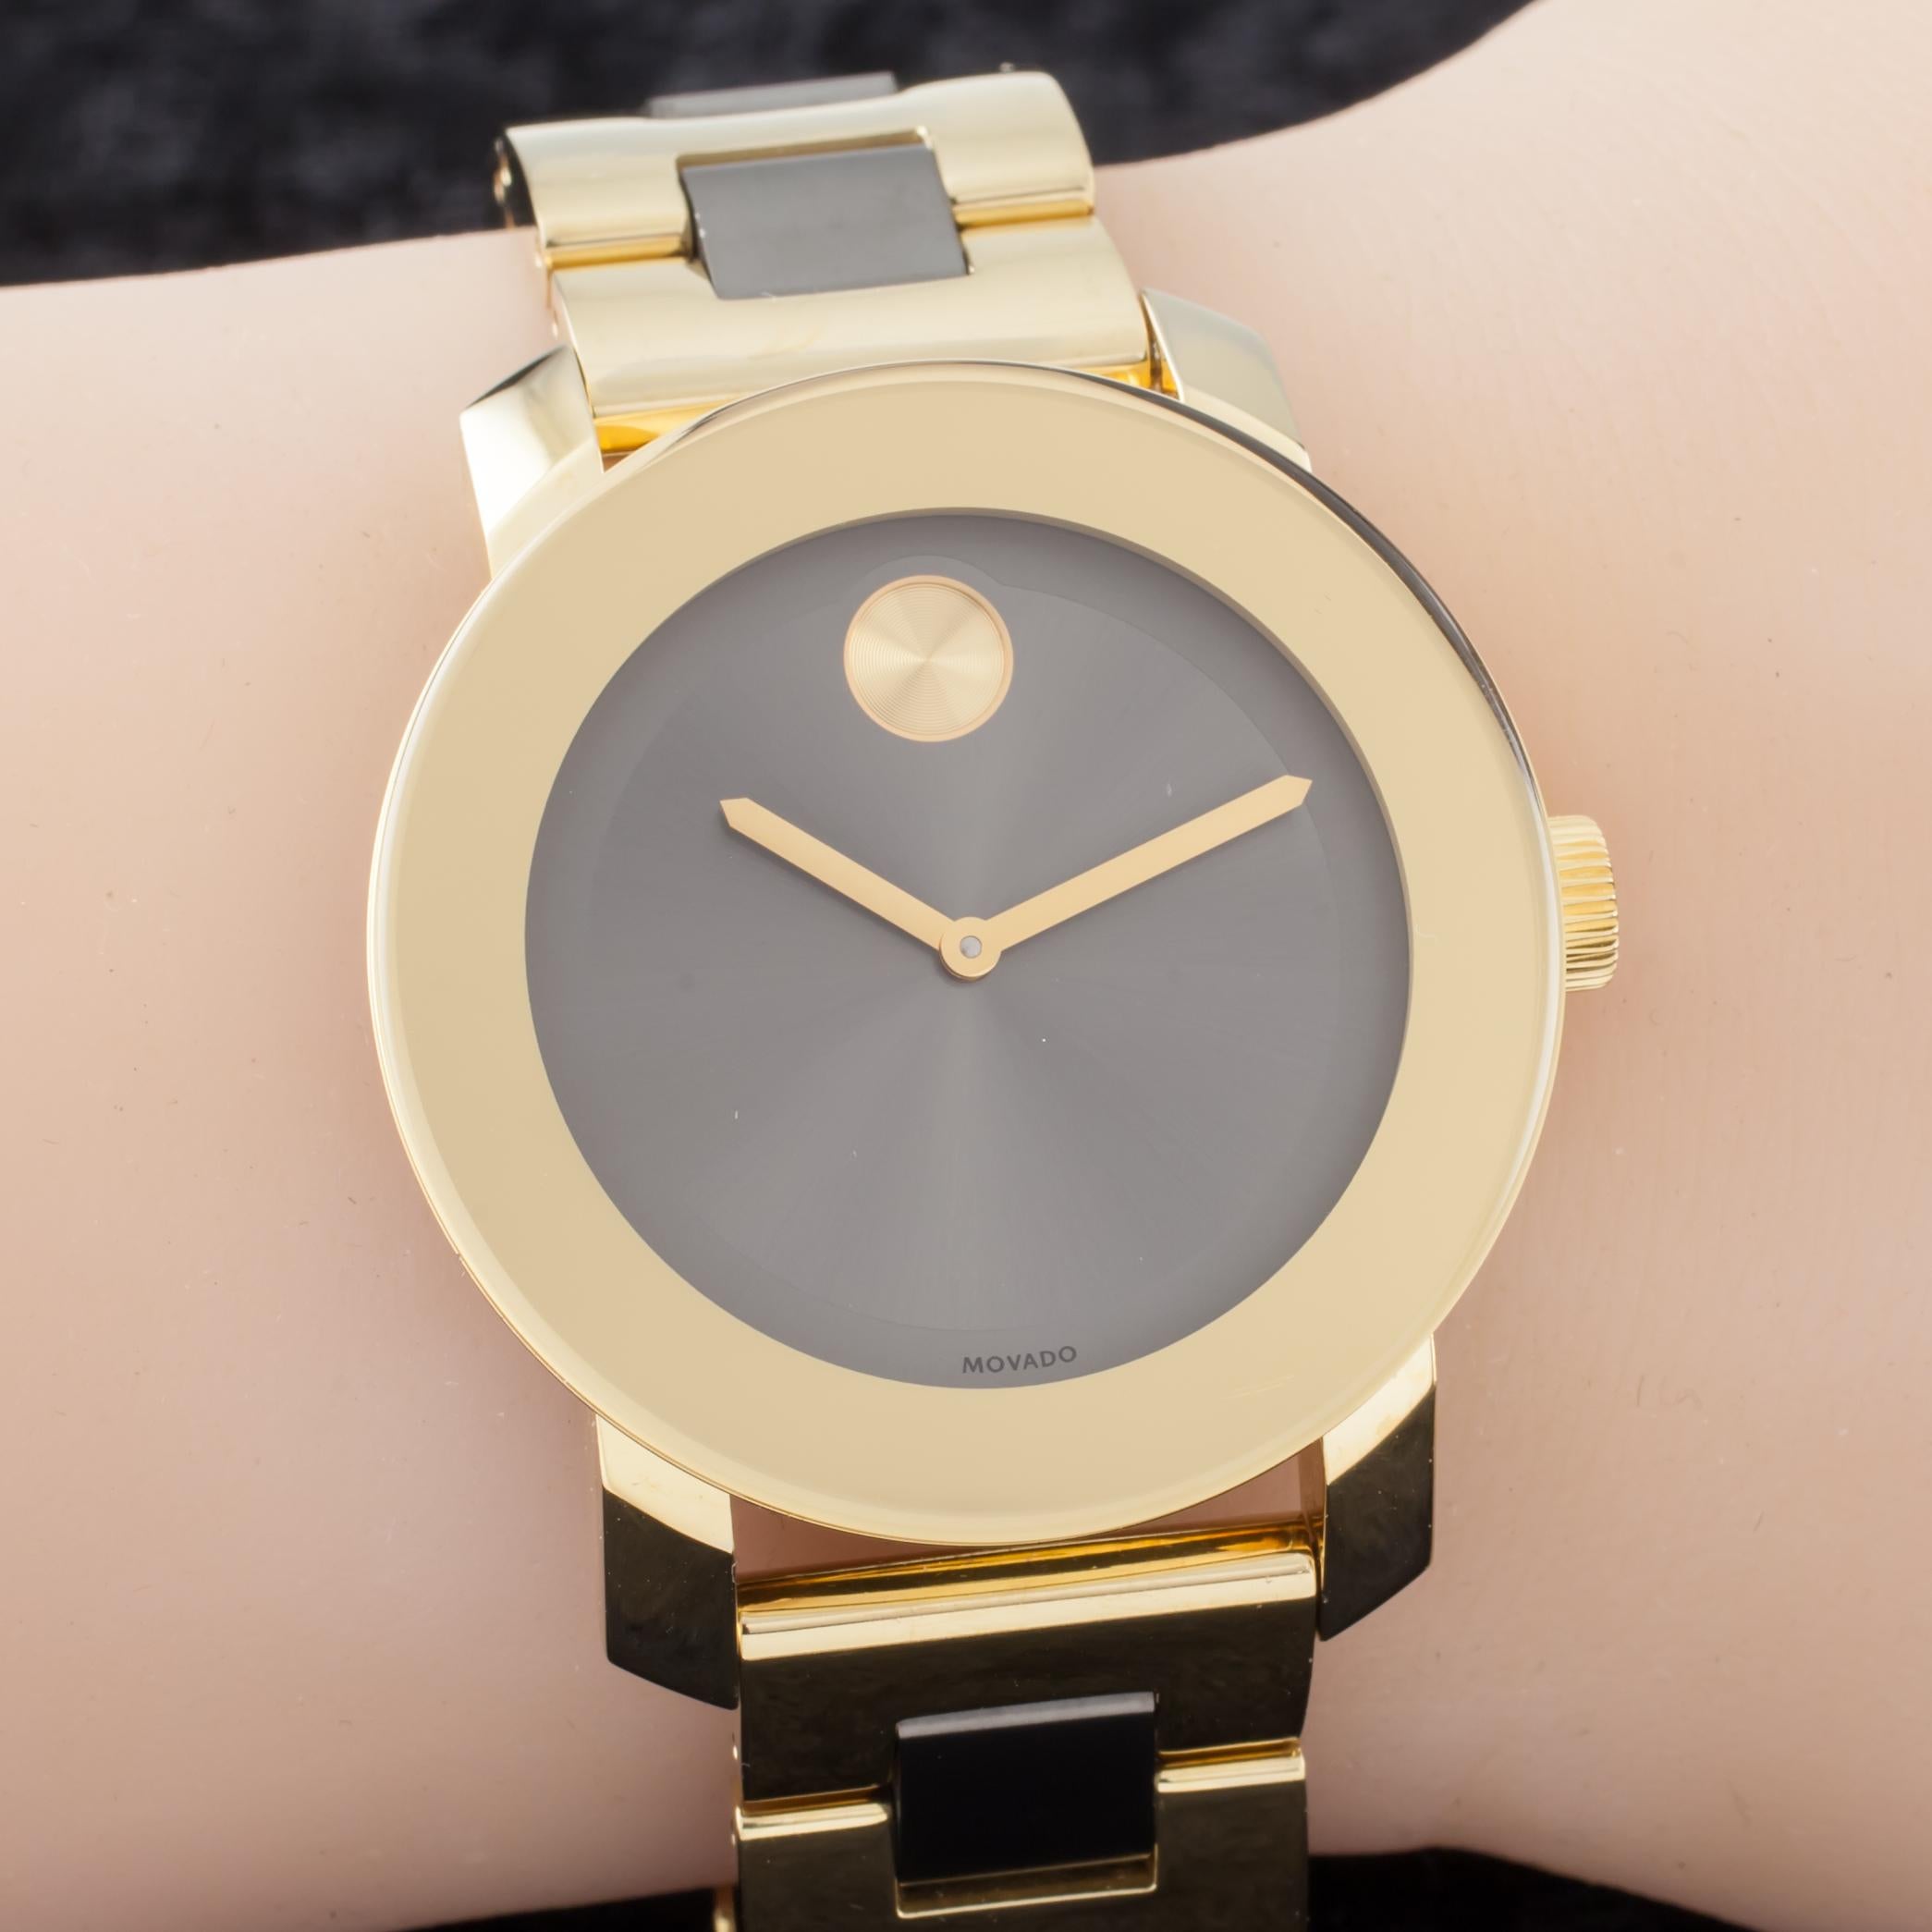 Model: Movado Bold
Model #MB.01.3.34.6038
Gold Plated Case
36 mm in Diameter (38 mm w/ Crown)
Lug-to-Lug Distance = 43 mm
Lug-to-Lug Width = 18 mm
Thickness = 10 mm
Gray Dial w/ Gold Hands and Trademark Moon Symbol at 12:00
27 mm in Diameter
Gold